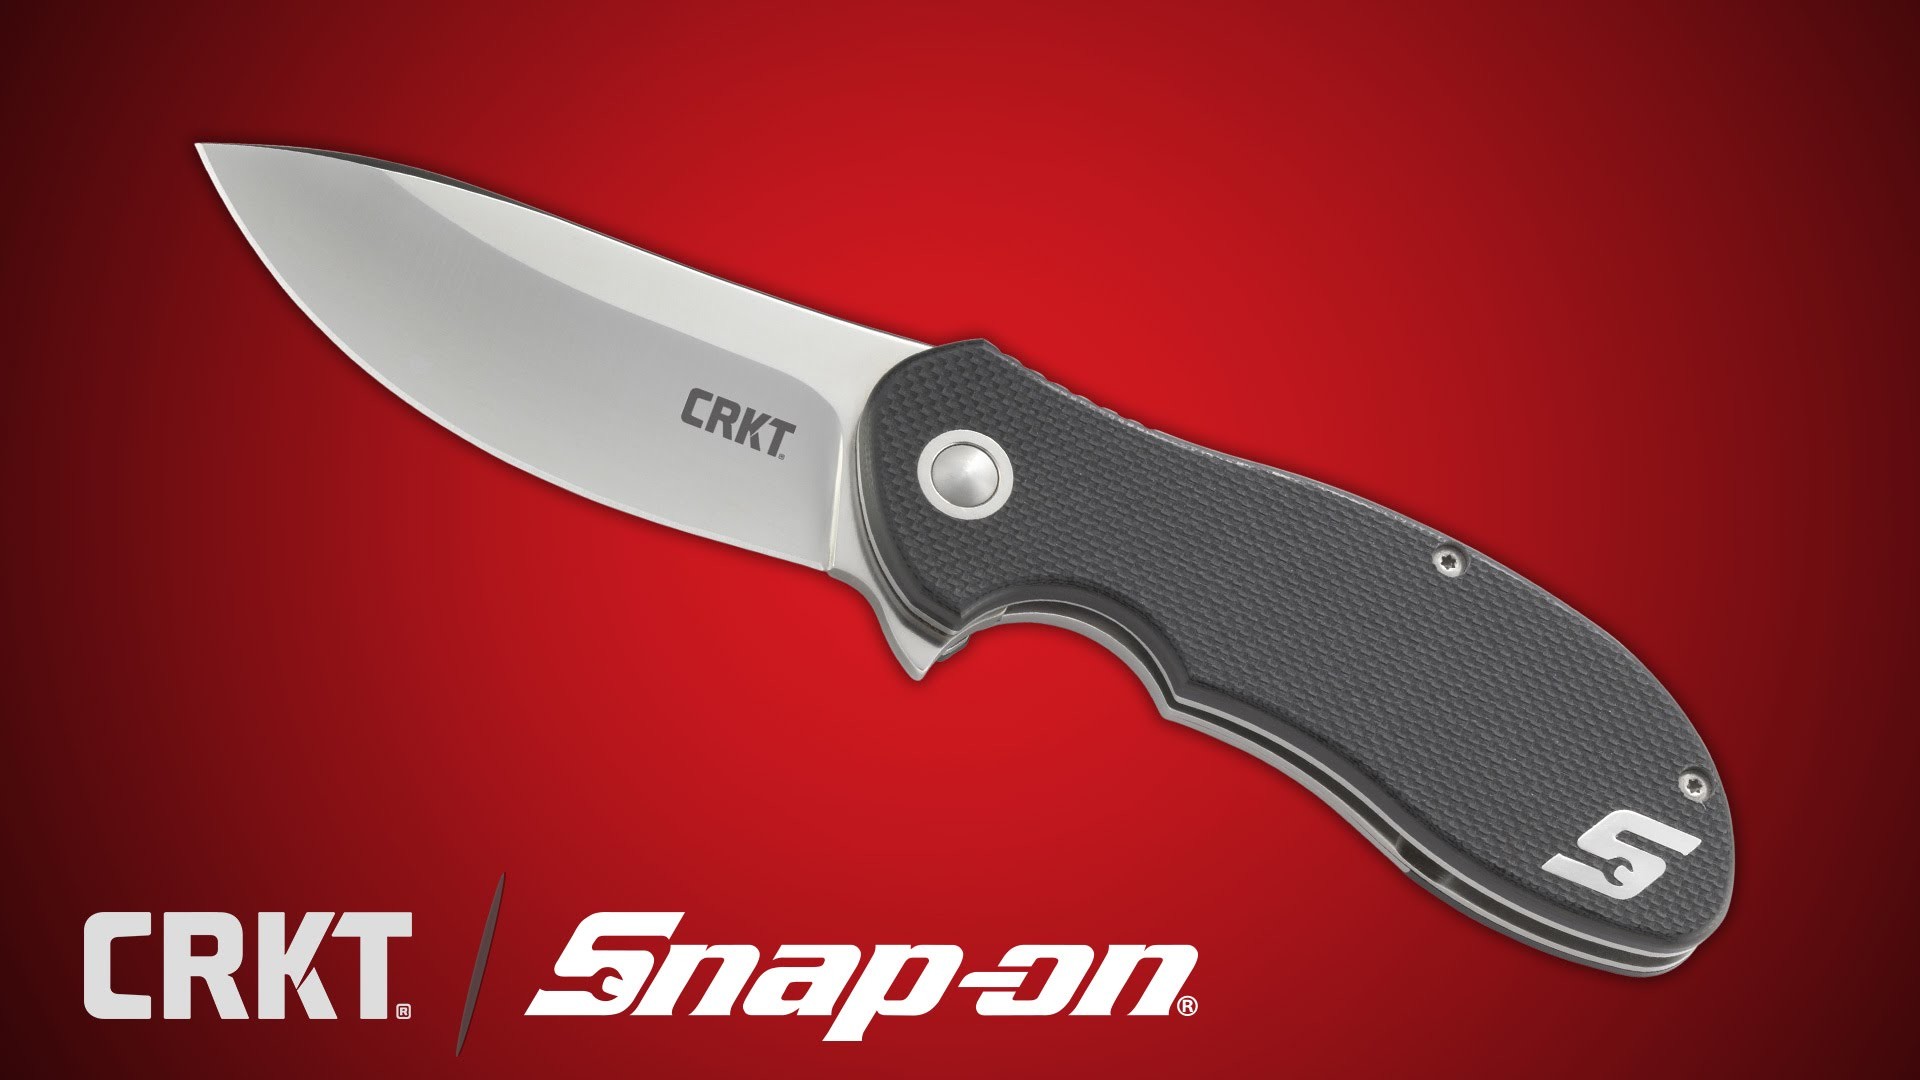 Snap on Exclusive Relay Knife a Ken Onion Design